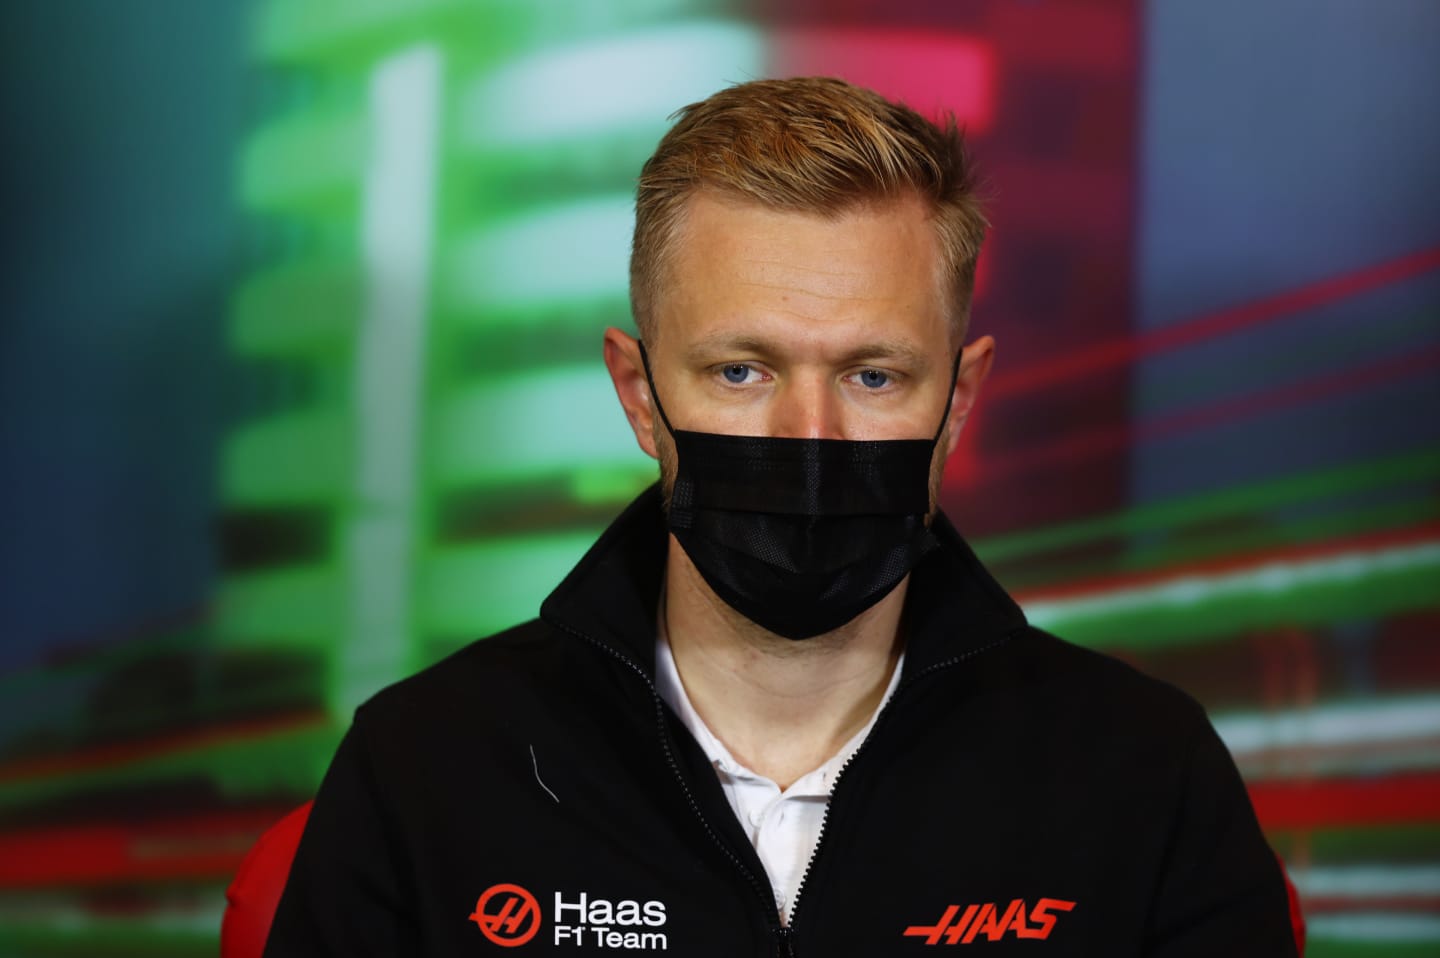 IMOLA, ITALY - APRIL 22: Kevin Magnussen of Denmark and Haas F1 talks in the Drivers Press Conference prior to practice ahead of the F1 Grand Prix of Emilia Romagna at Autodromo Enzo e Dino Ferrari on April 22, 2022 in Imola, Italy. (Photo by Lars Baron/Getty Images)